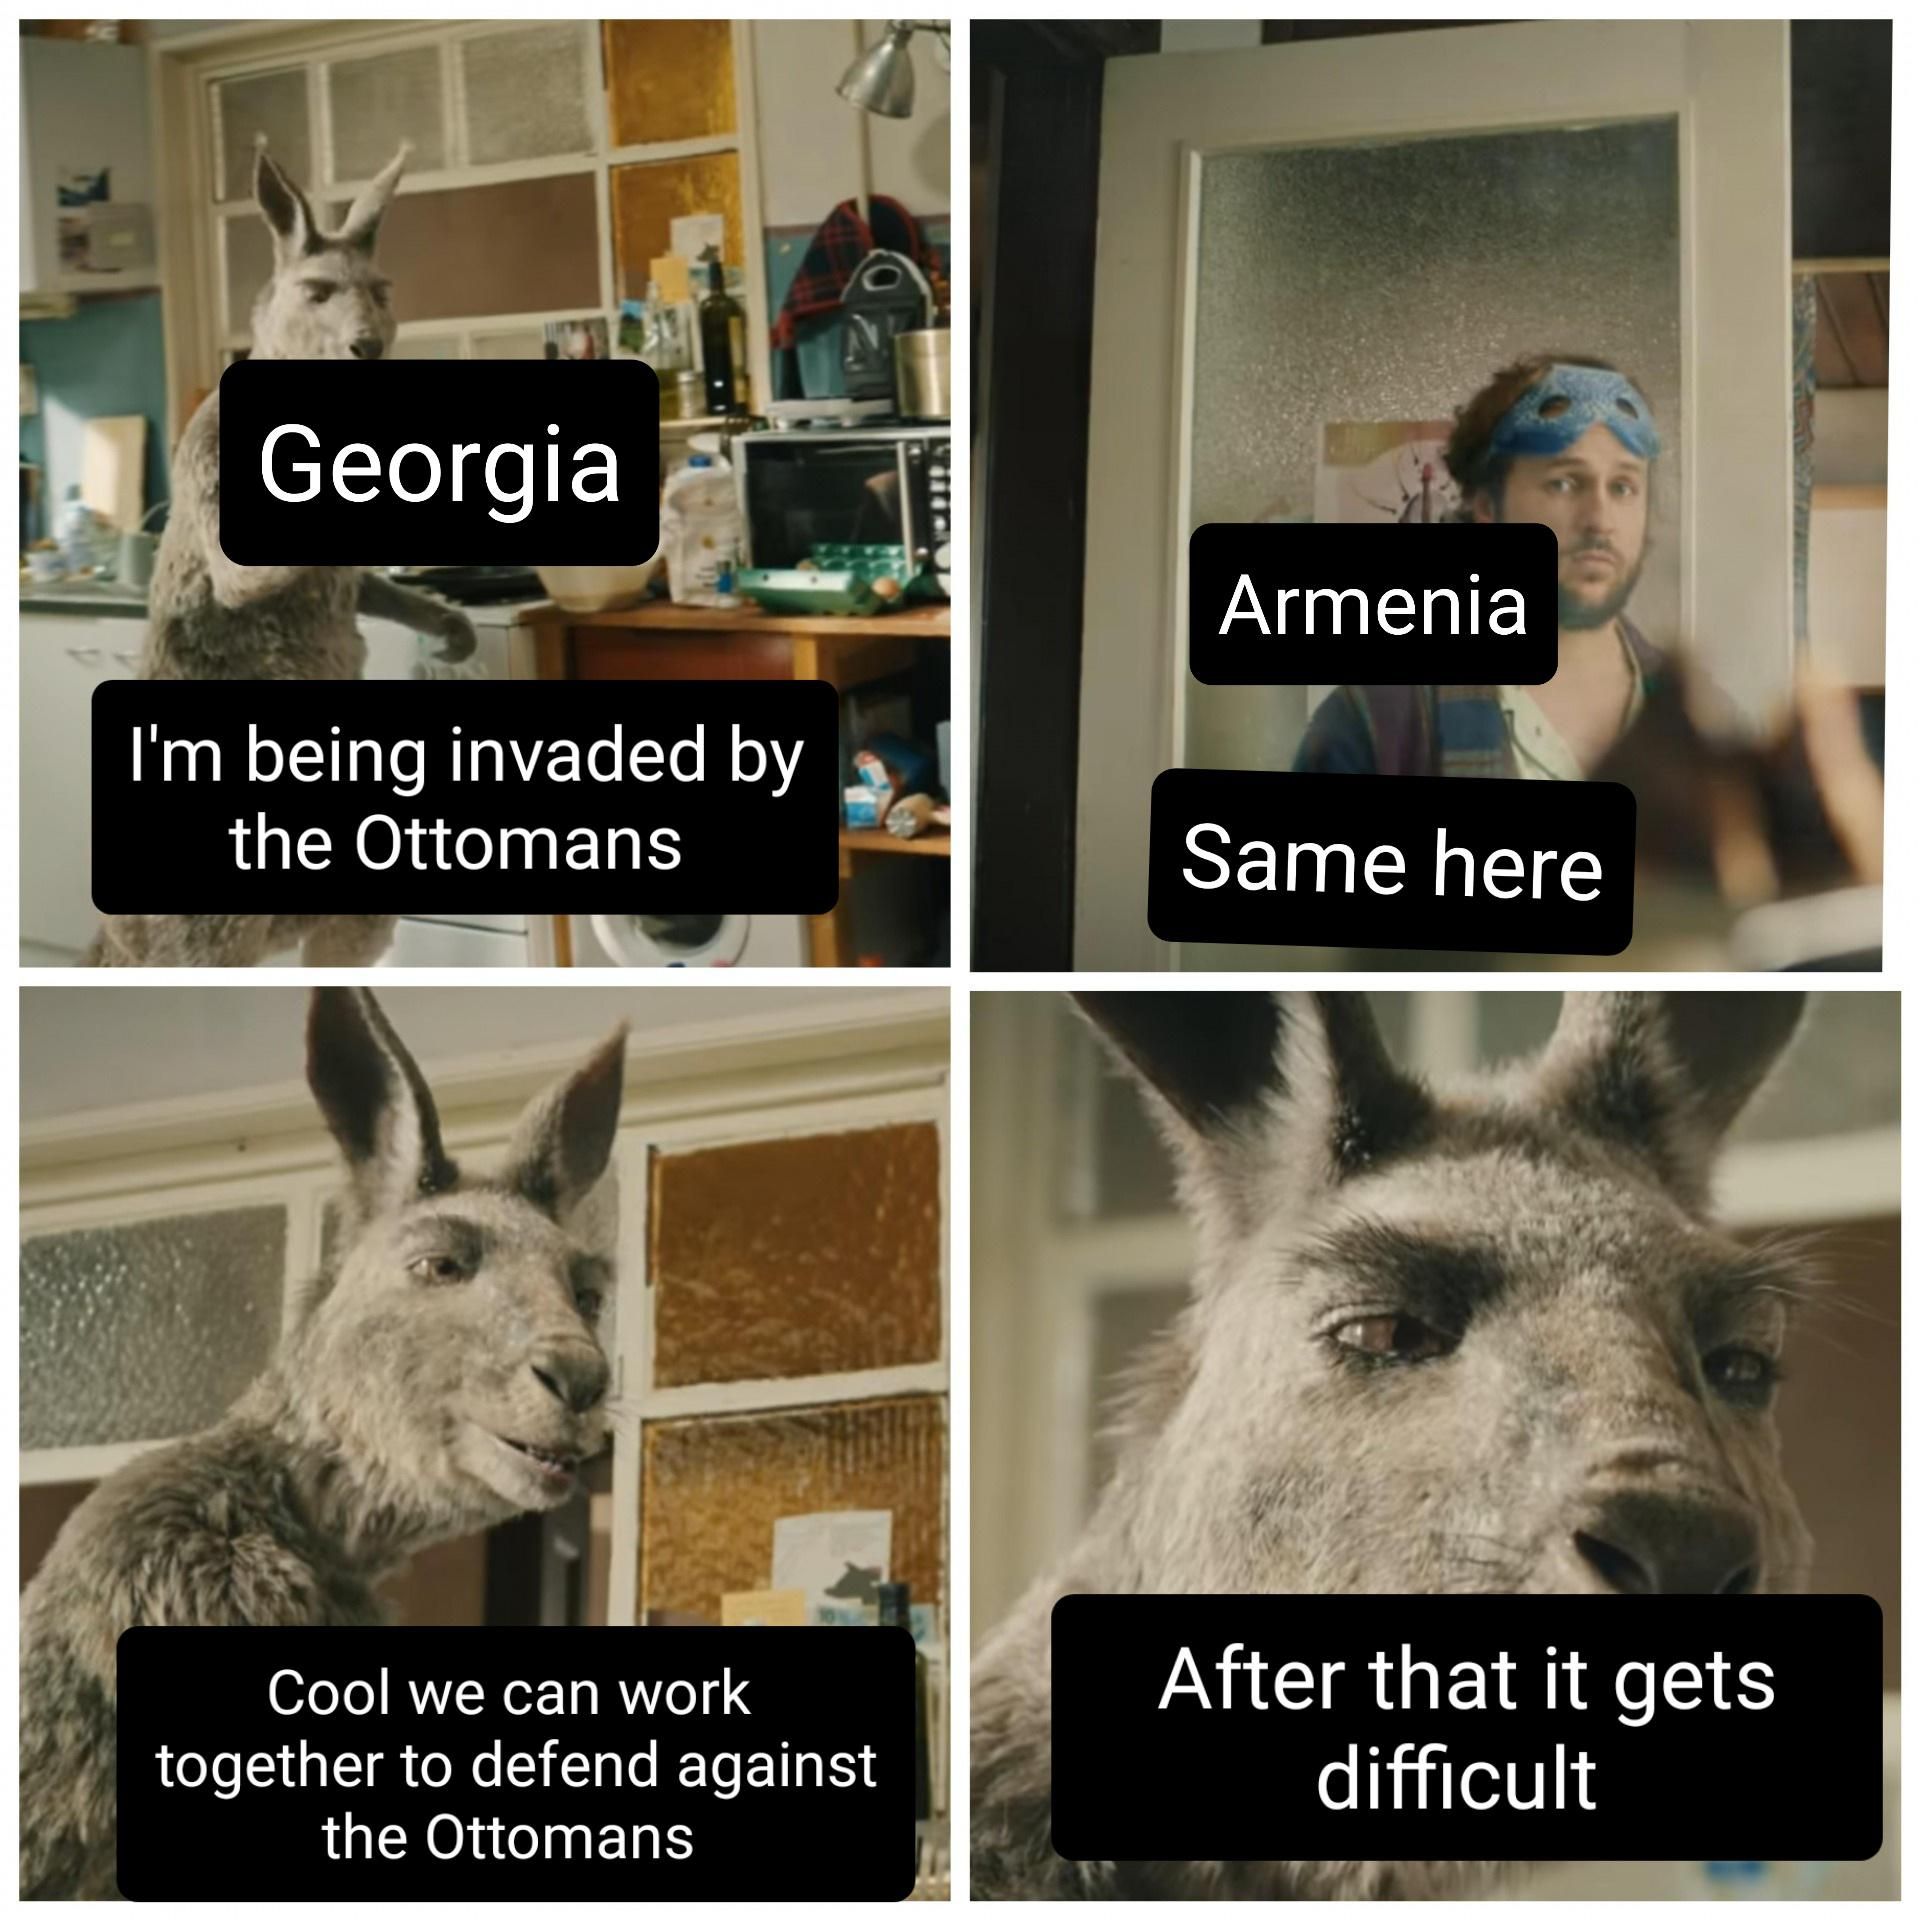 Making a meme of every country's history day 178: Armenia